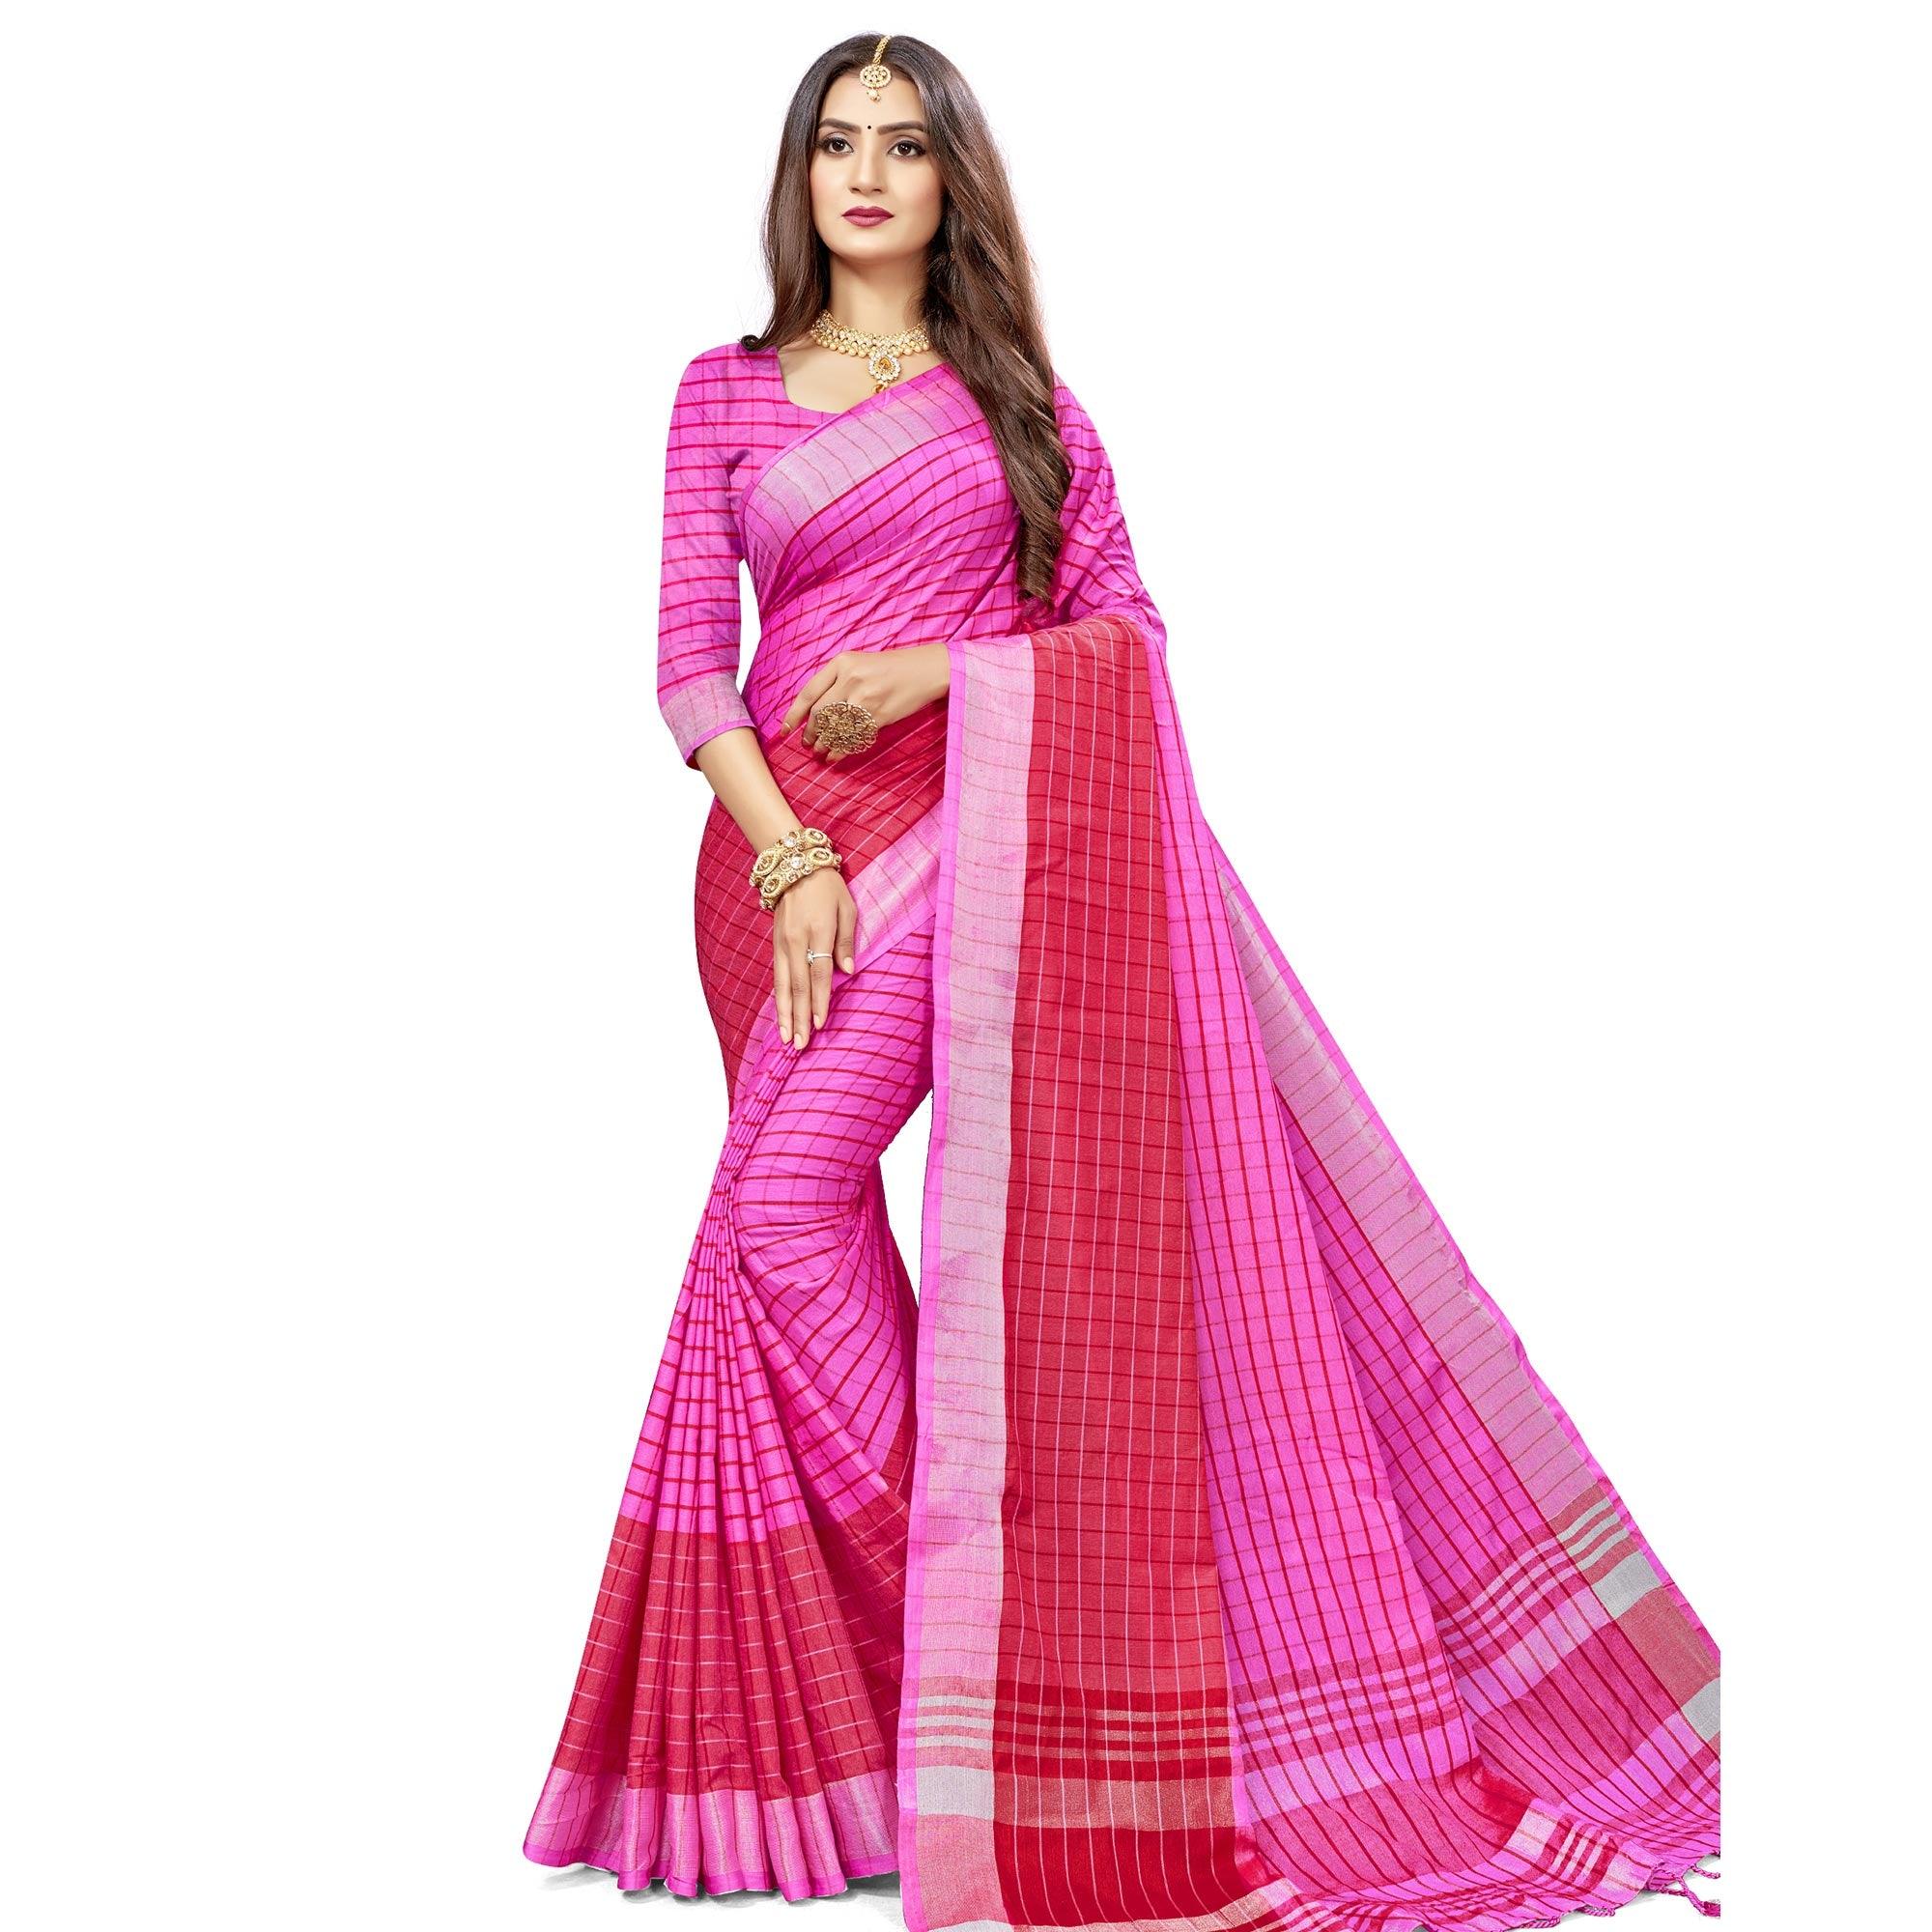 Engrossing Pink Colored Fesive Wear Checks Print Cotton Silk Saree With Tassels - Peachmode